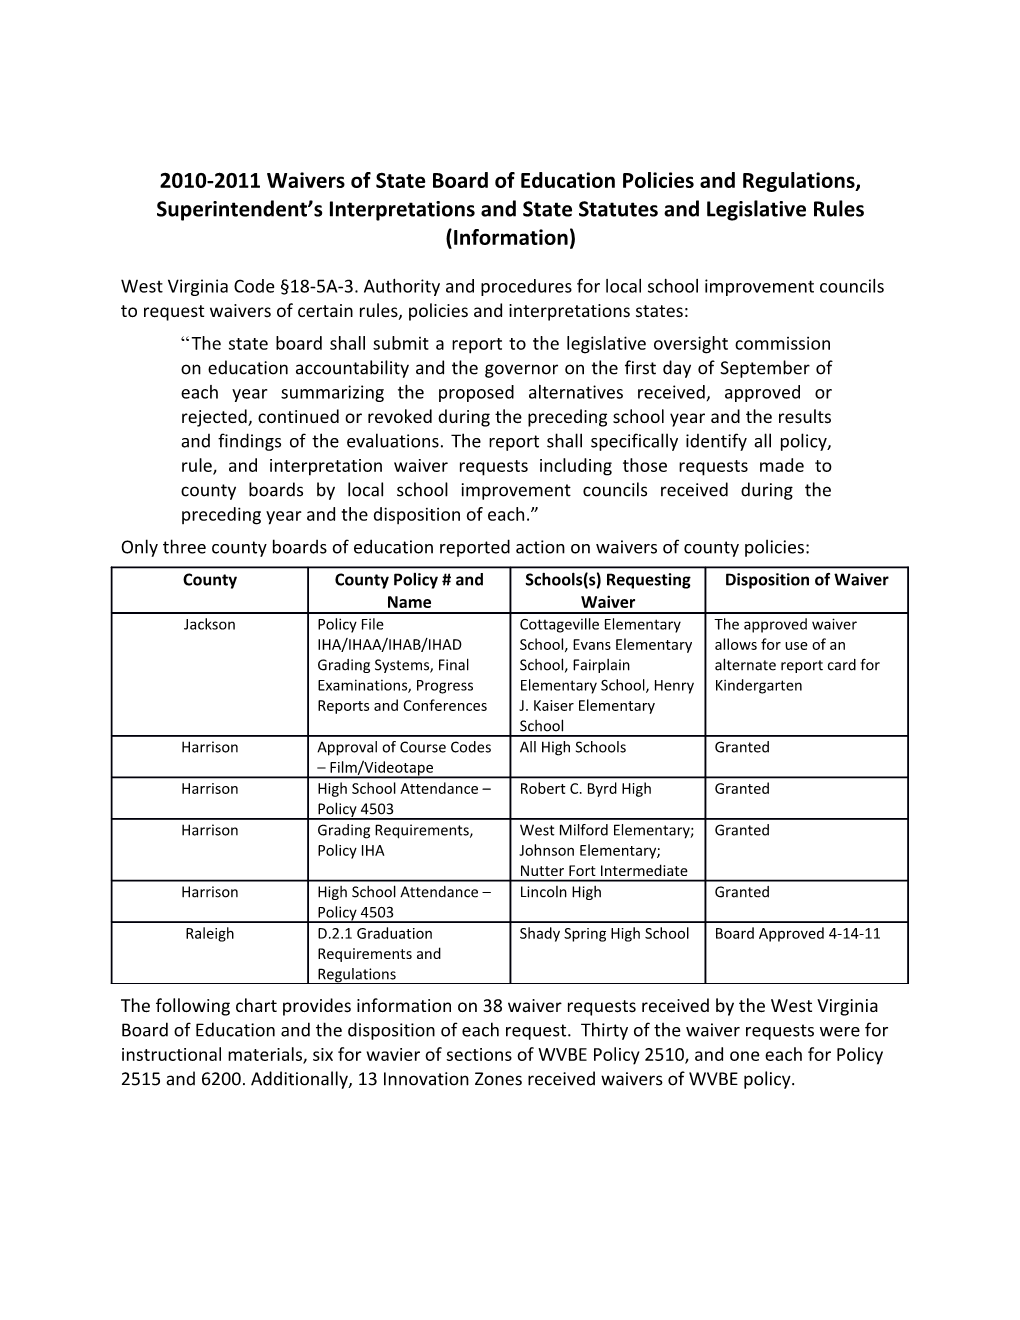 2010-2011 Waivers of State Board of Education Policies and Regulations, Superintendent